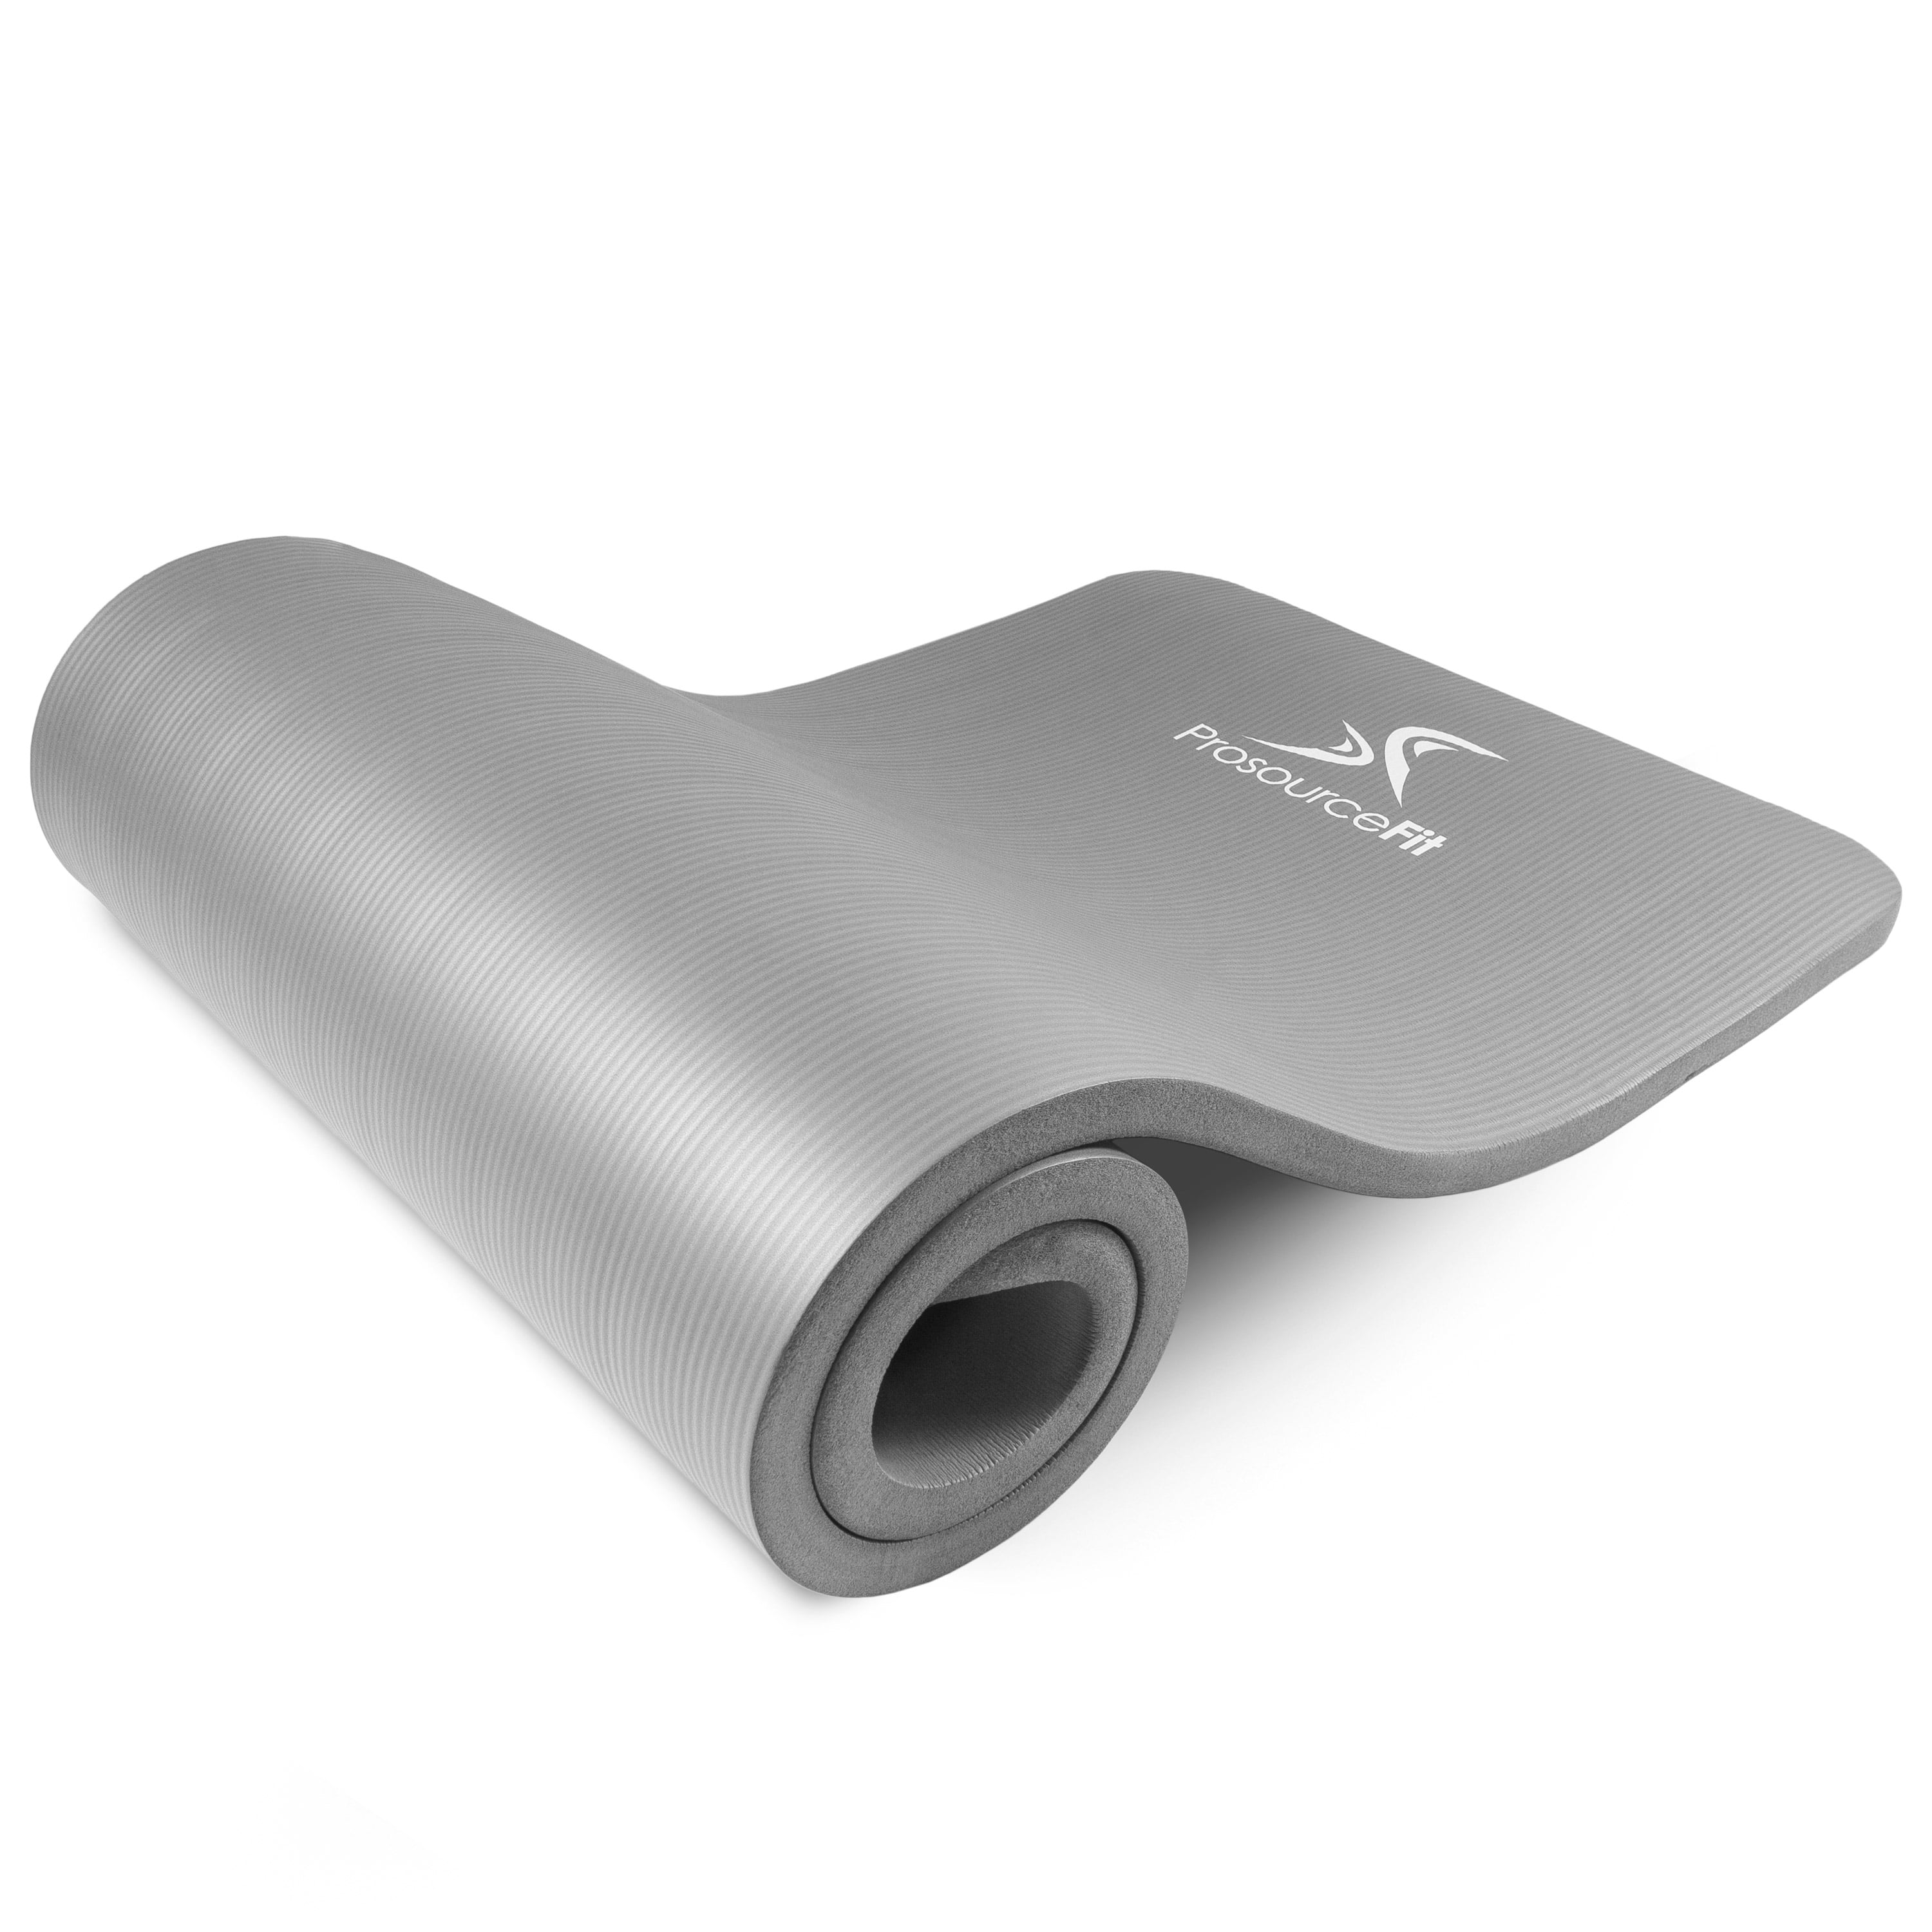 Extra Thick Yoga and Pilates Mat 1 inch Grey